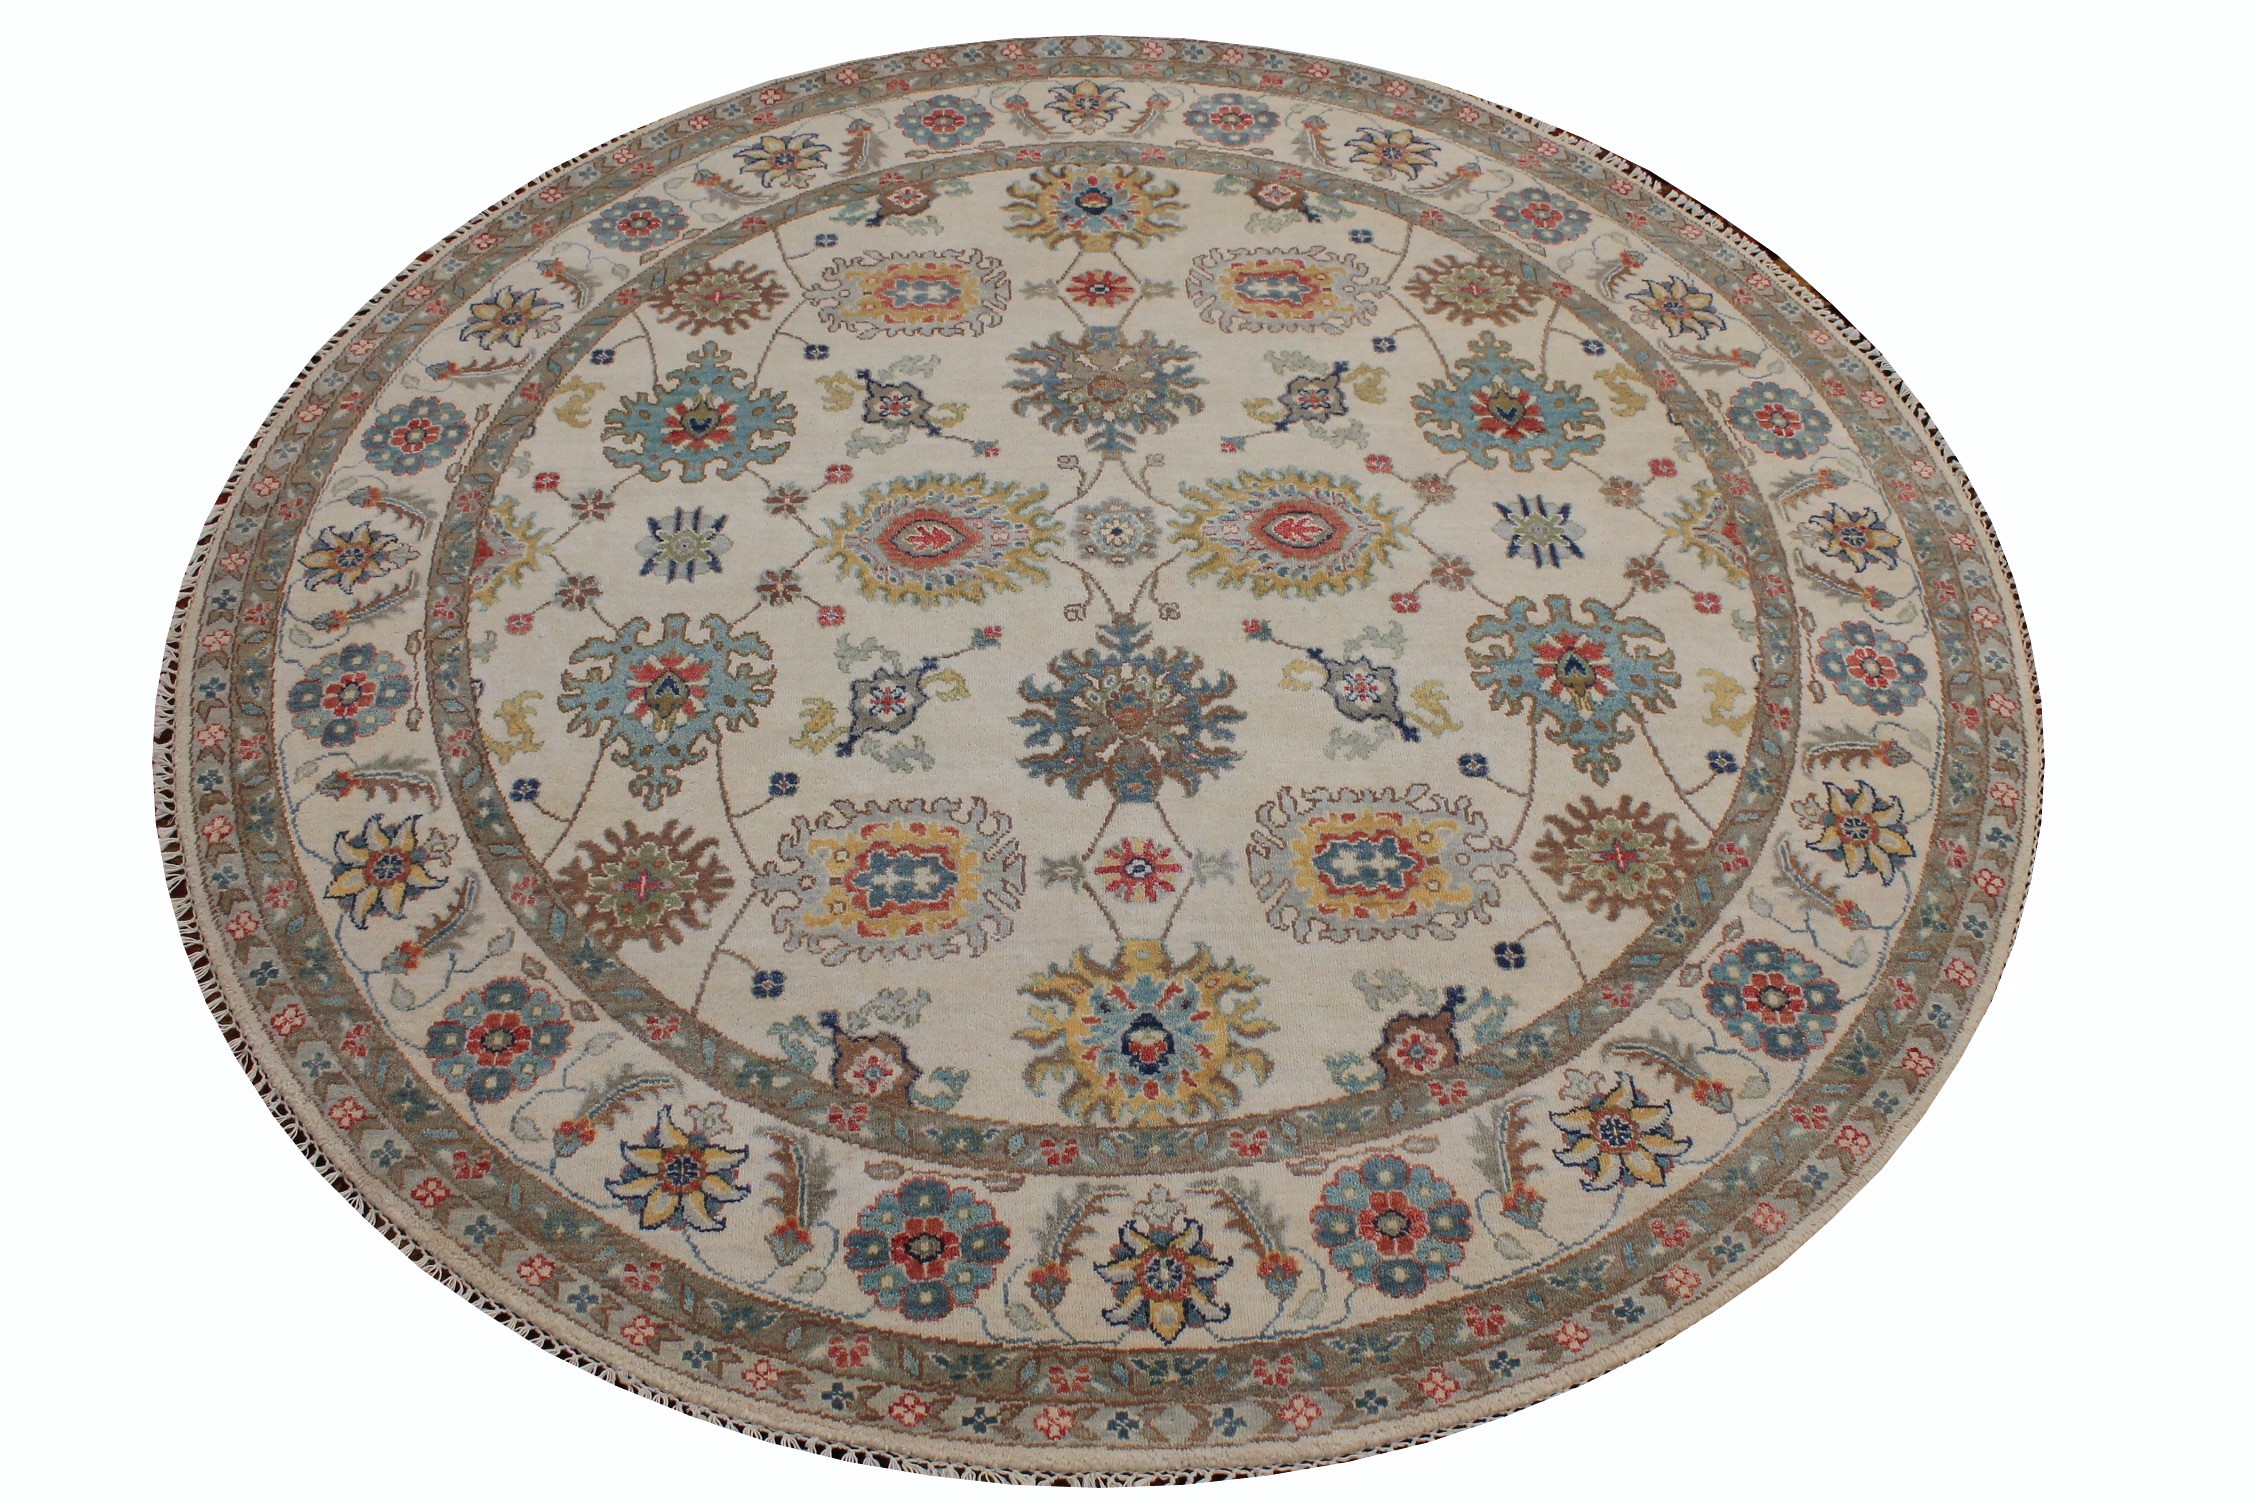 6 ft. - 7 ft. Round & Square Traditional Hand Knotted Wool Area Rug - MR026818